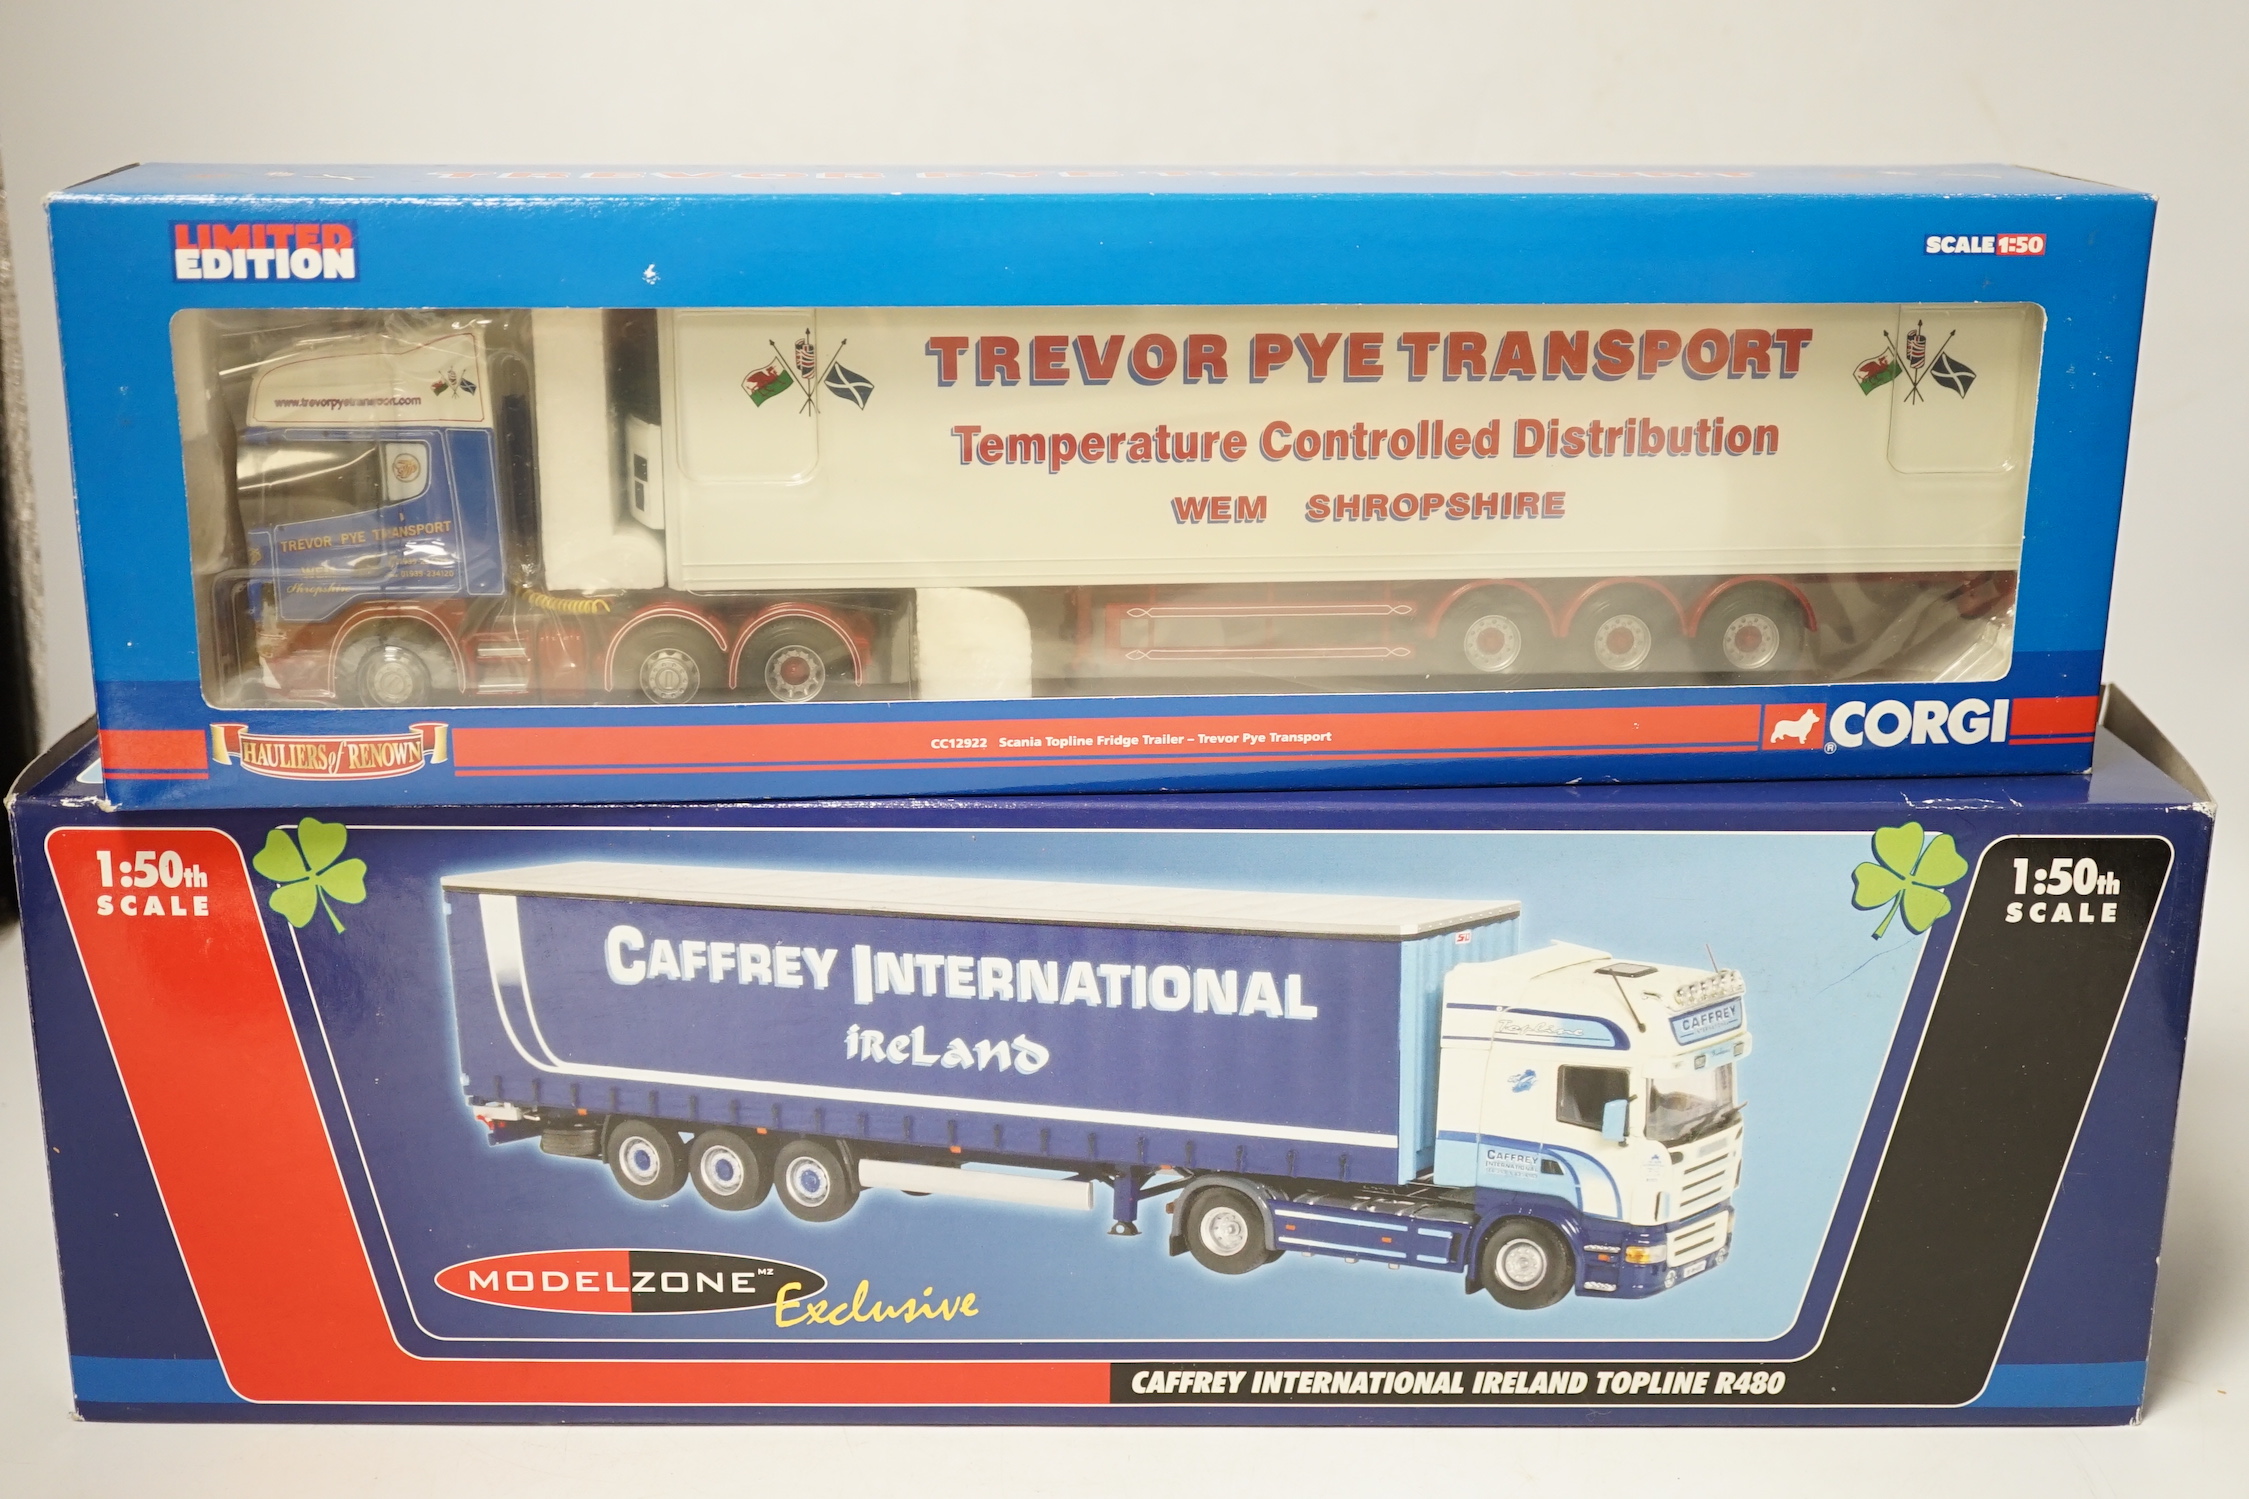 Four boxed Corgi and Universal Hobbies 1:50 scale articulated trucks; a Scania refrigerated lorry (CC13727), Scania Topline refrigerated lorry (CC12922), a Renault Premium Curtainside (75602), and another Scania Topline